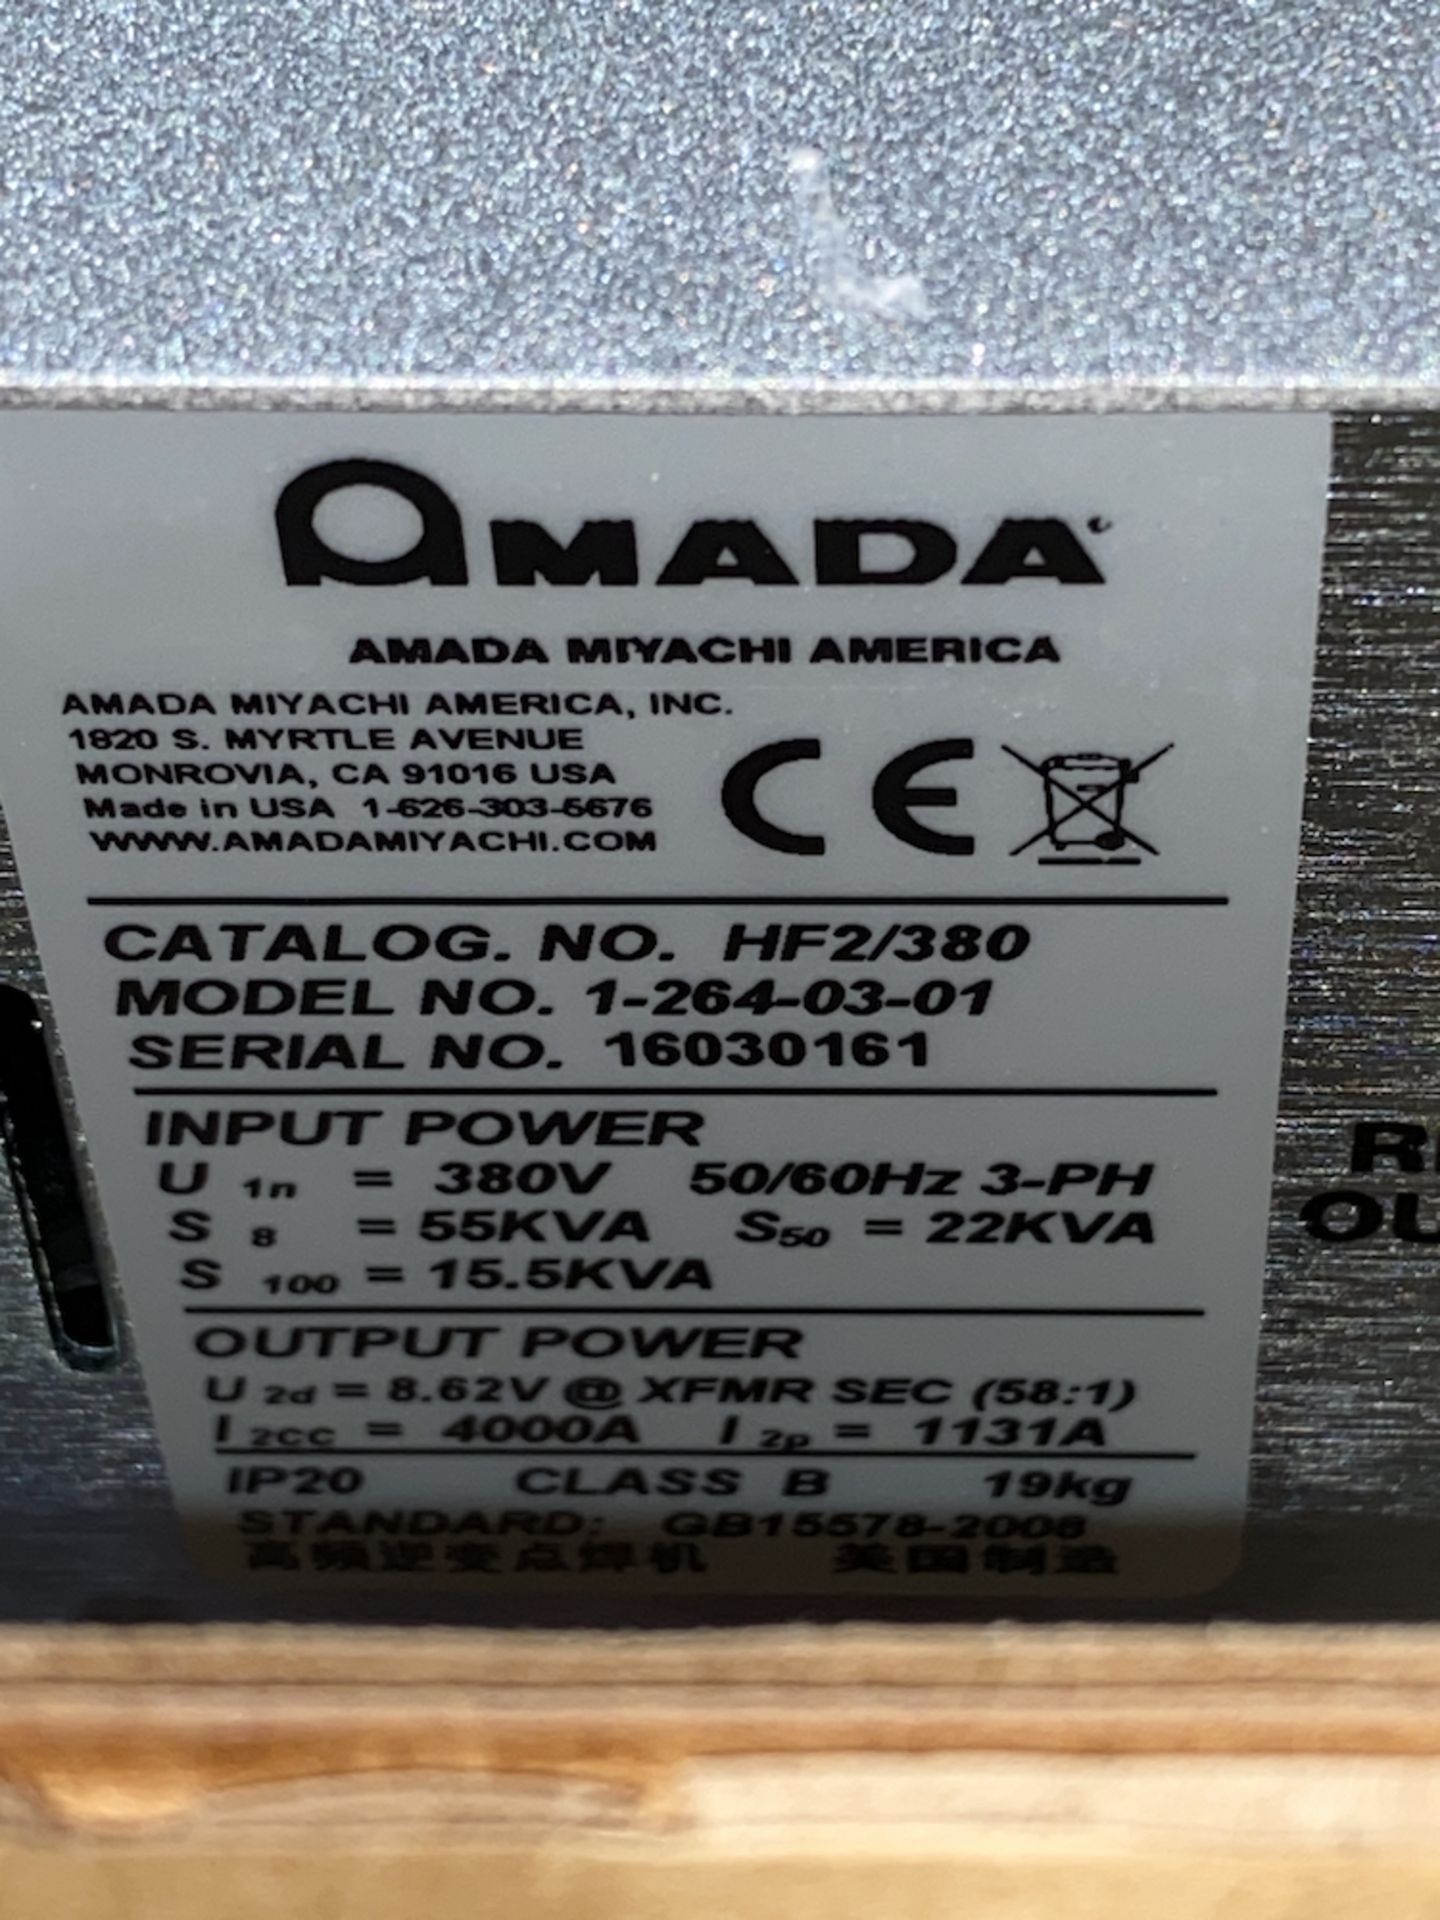 NEW IN BOX - AMADA MIYACHI HF2/380 HIGH FREQUENCY INVERTER WELDING CONTROL - Image 5 of 8